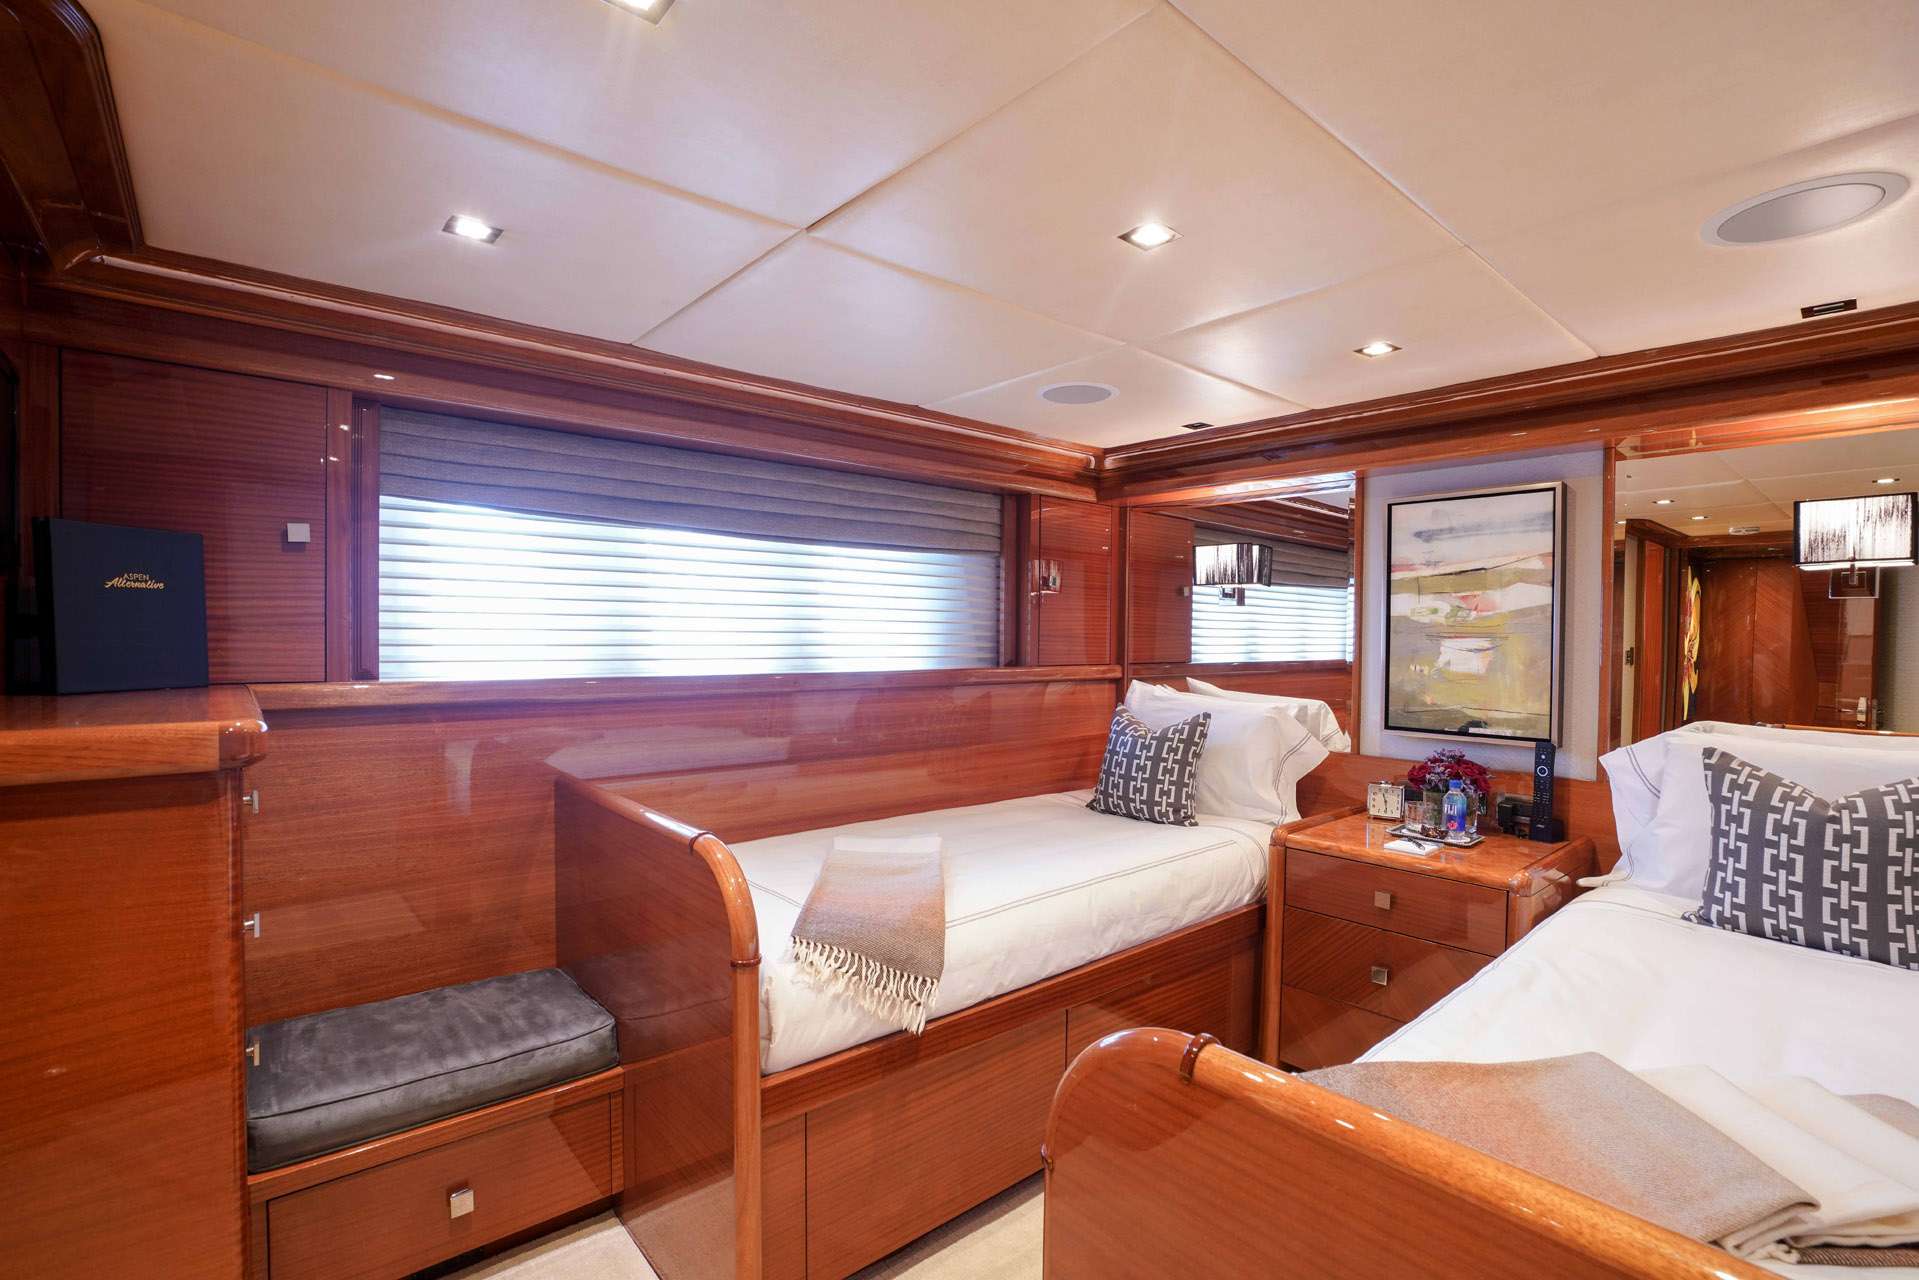 Motor Yacht 'ASPEN ALTERNATIVE' Twin Guest Stateroom, 10 PAX, 9 Crew, 164.00 Ft, 50.00 Meters, Built 2010, Trinity Yachts, Refit Year 2022